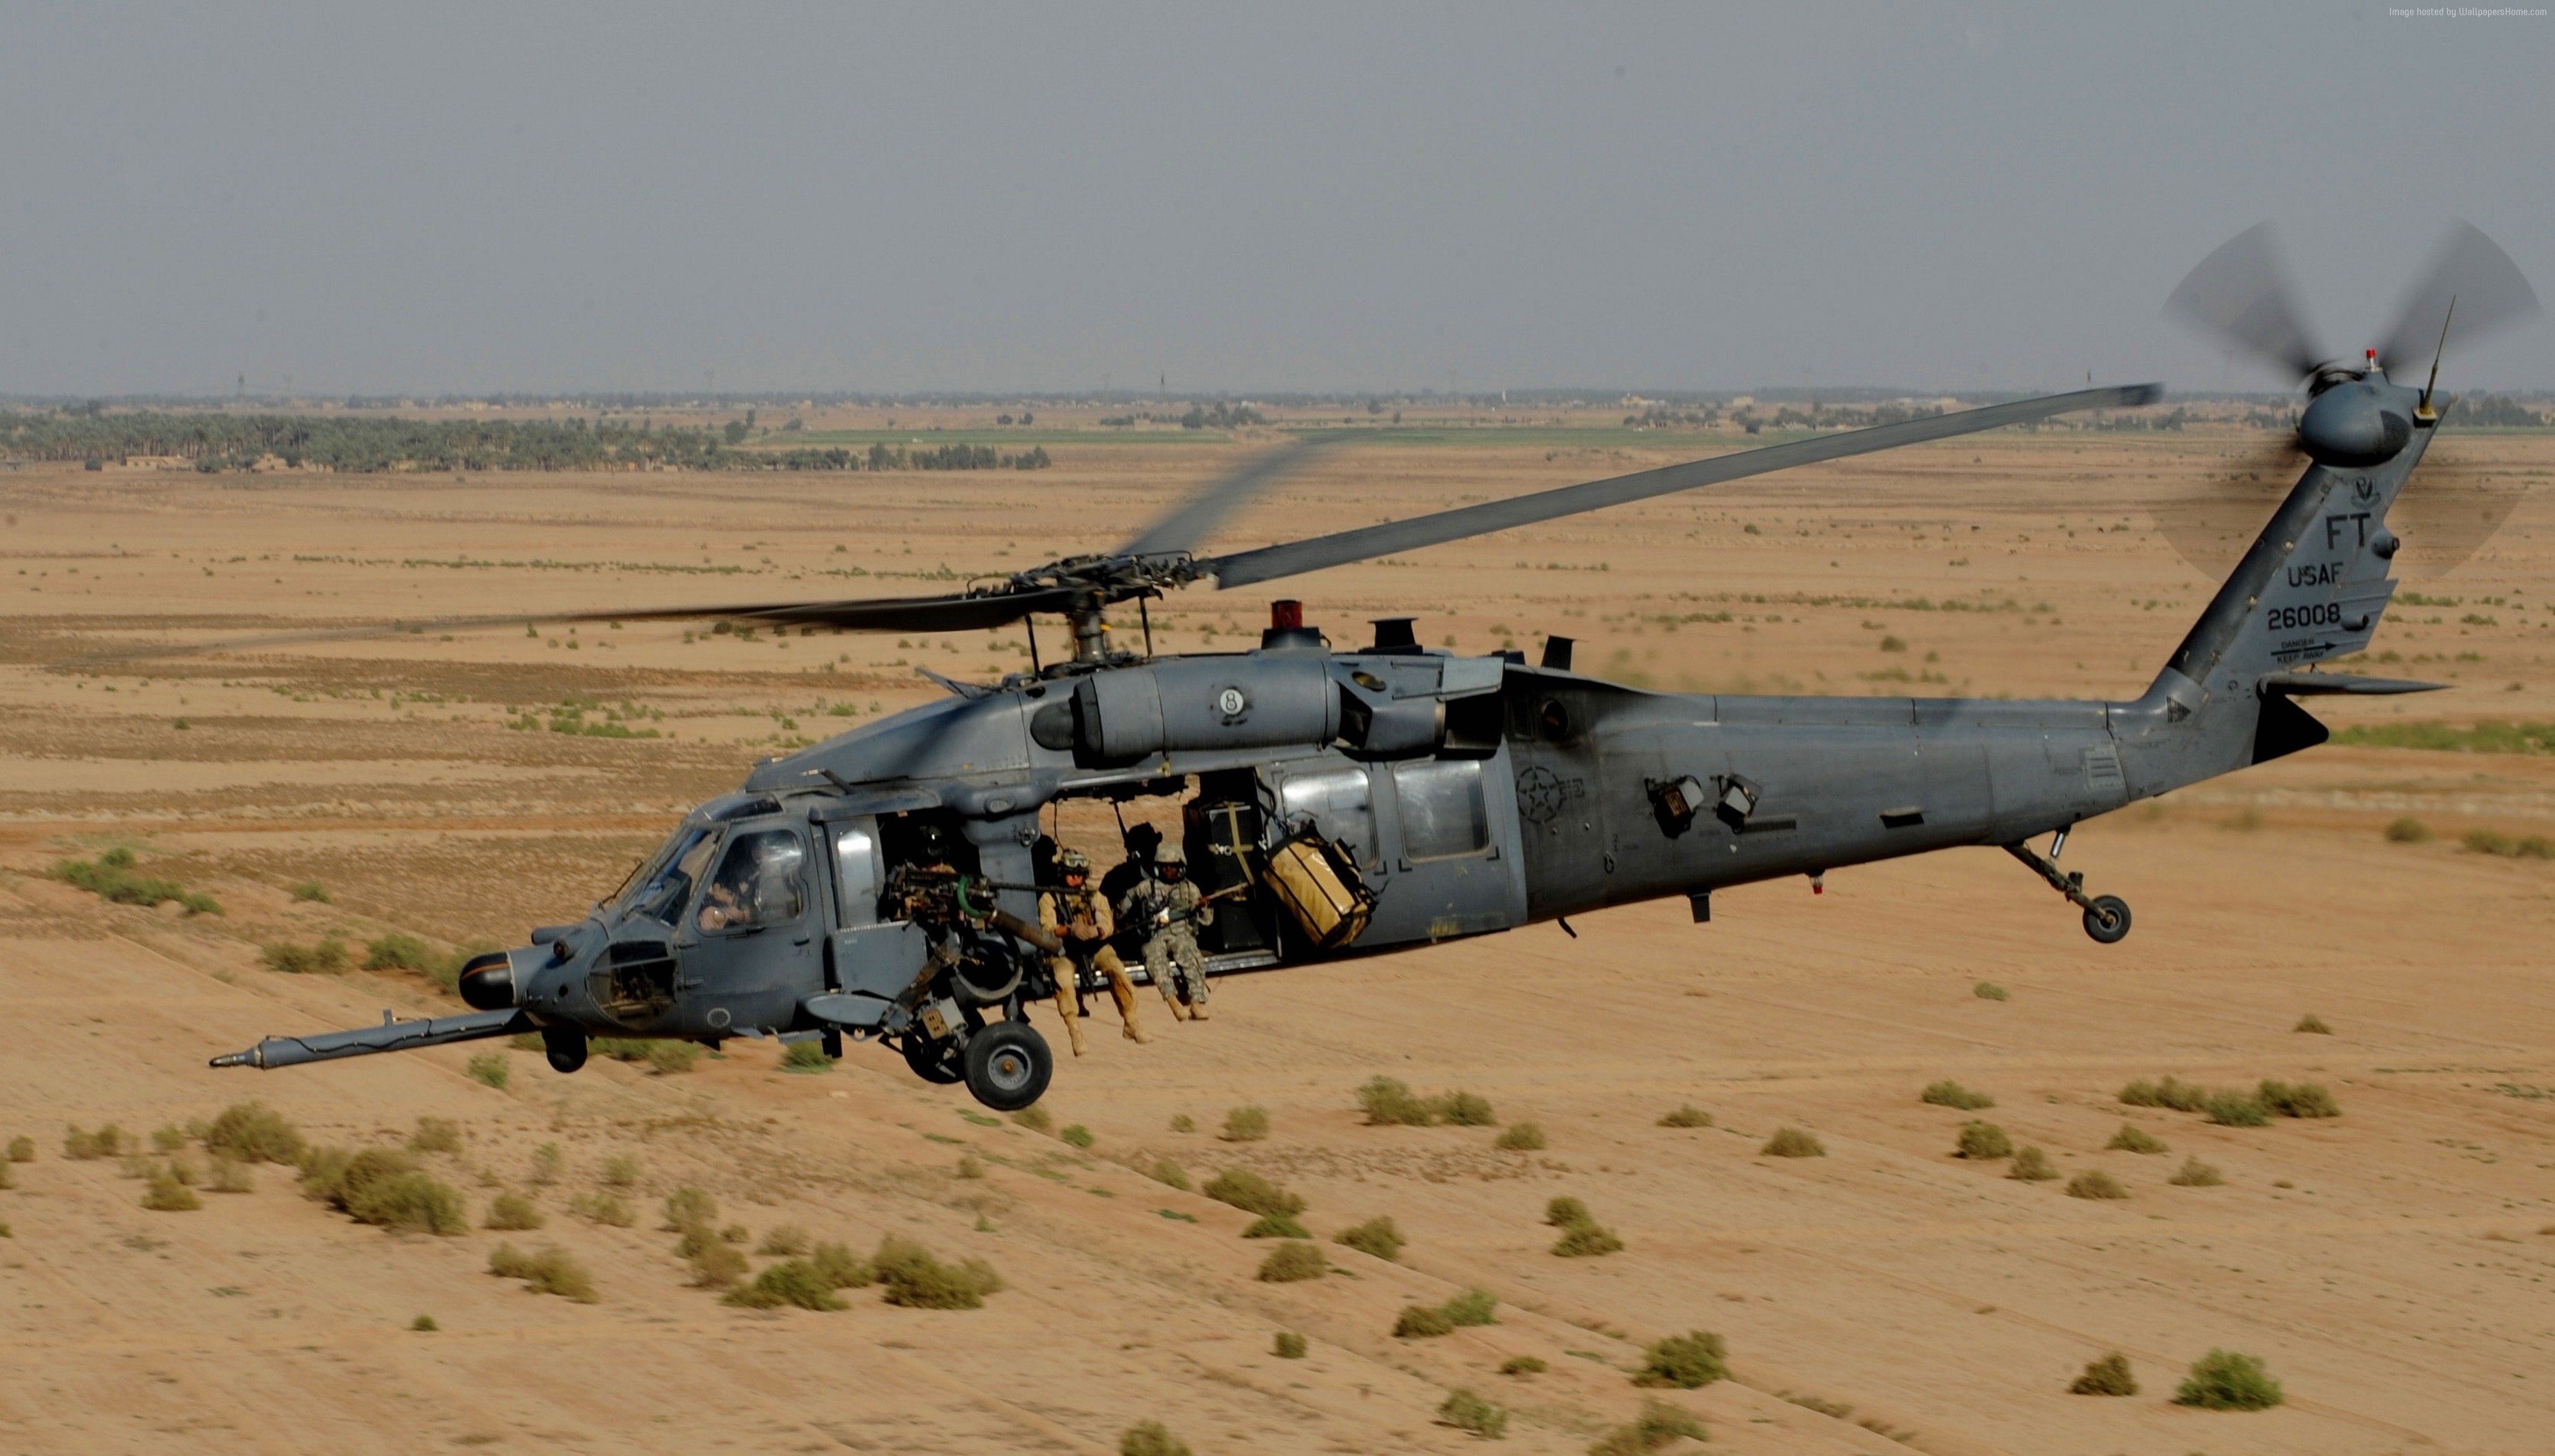 3700x2109 Blackhawk Helicopter Background For Desktop Wallpaper 3700 x 2109 px 2.29  MB rescue cobra attack in